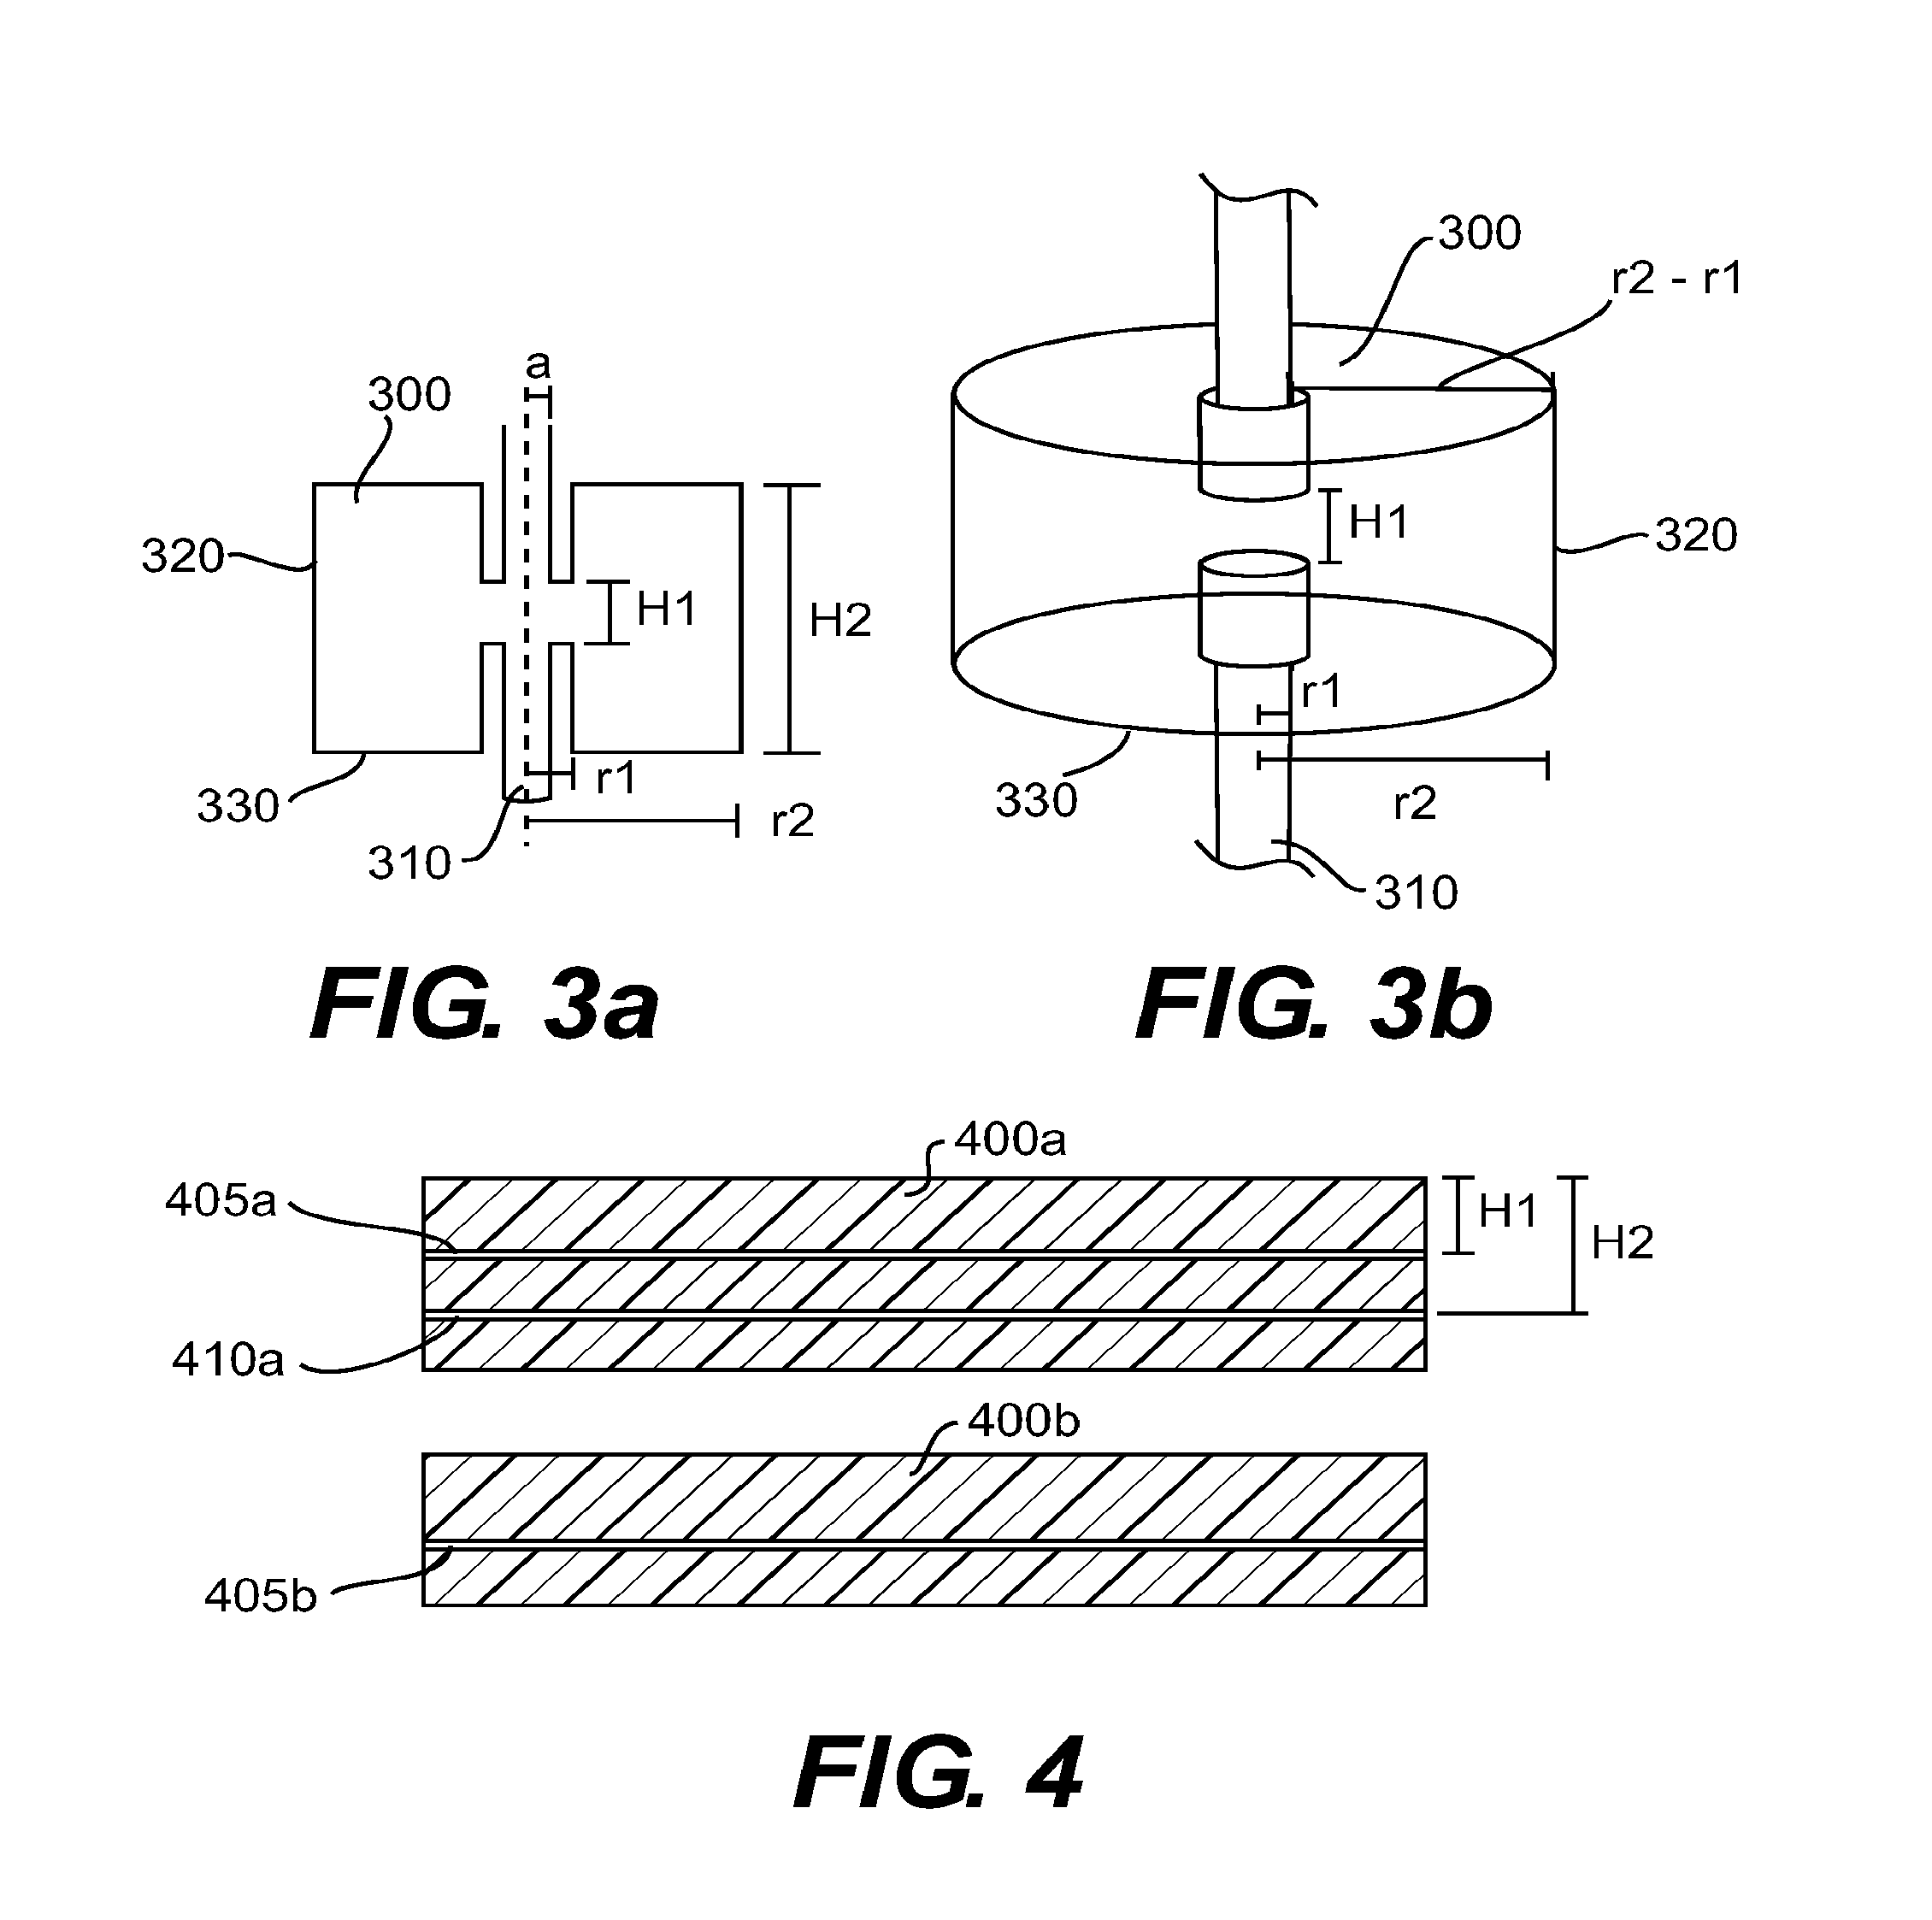 Multi-cavity vacuum electron beam device for operating at terahertz frequencies